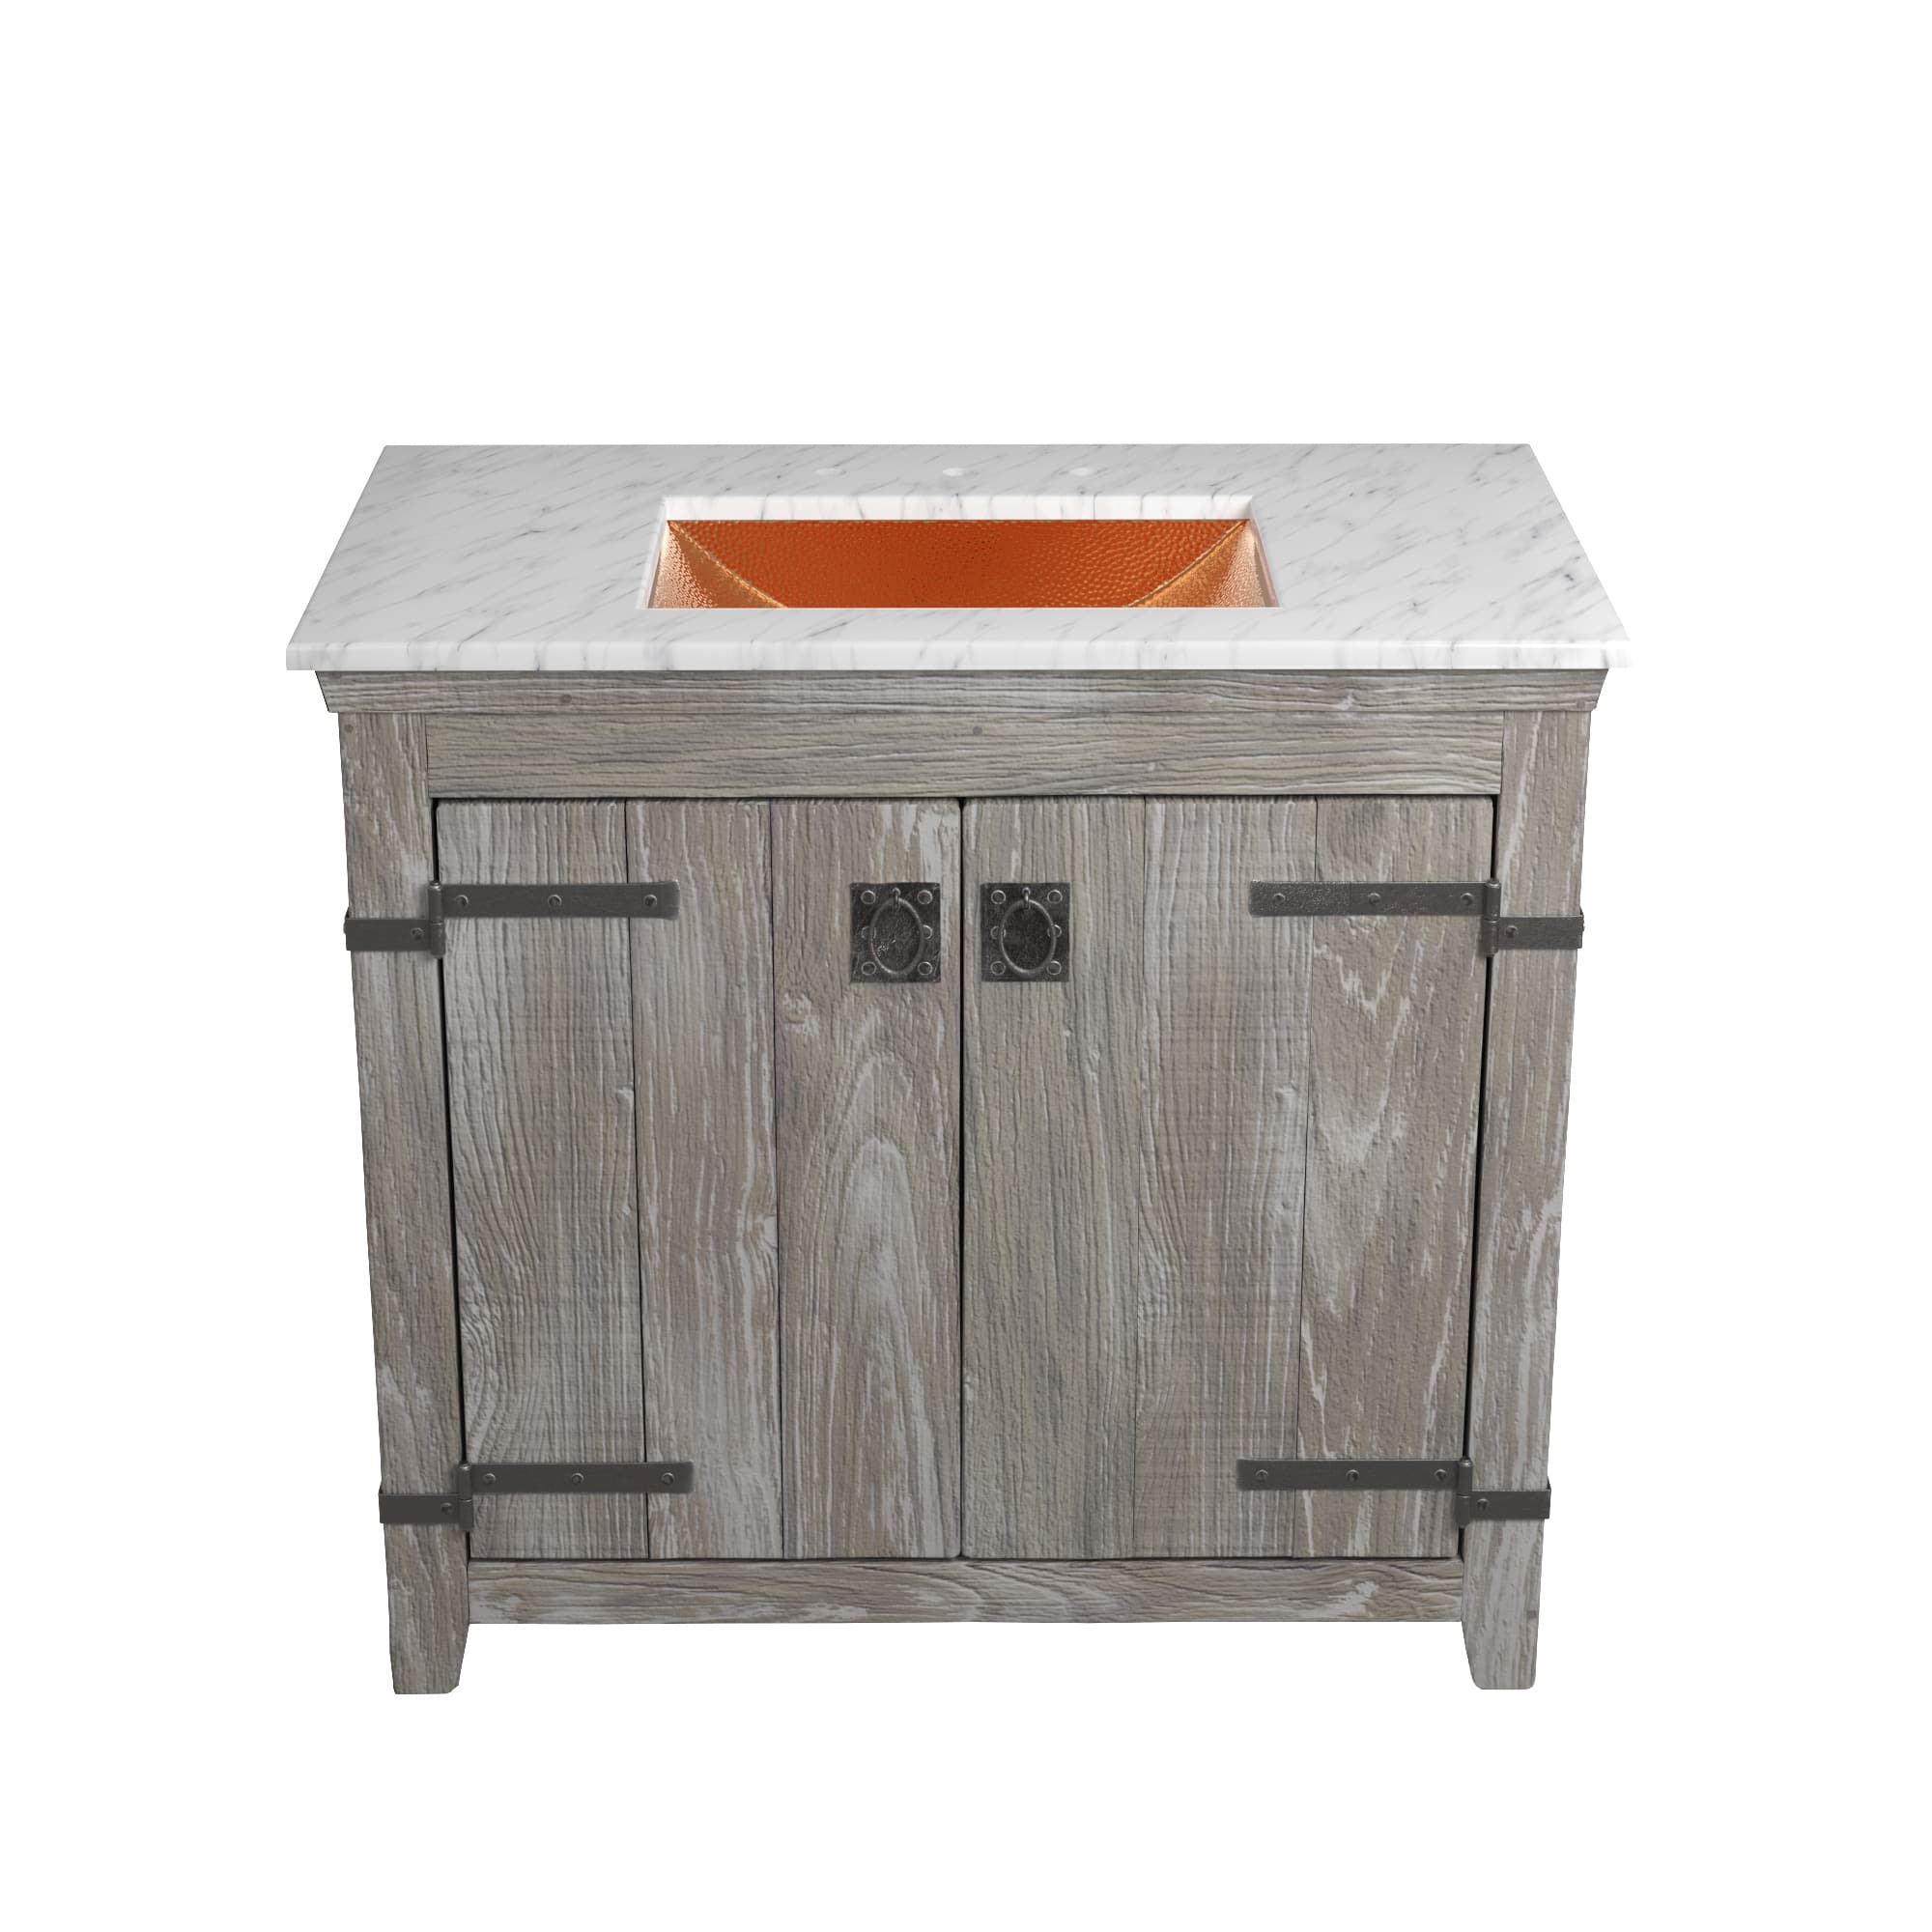 Native Trails 36" Americana Vanity in Driftwood with Carrara Marble Top and Avila in Polished Copper, 8" Widespread Faucet Holes, BND36-VB-CT-CP-016